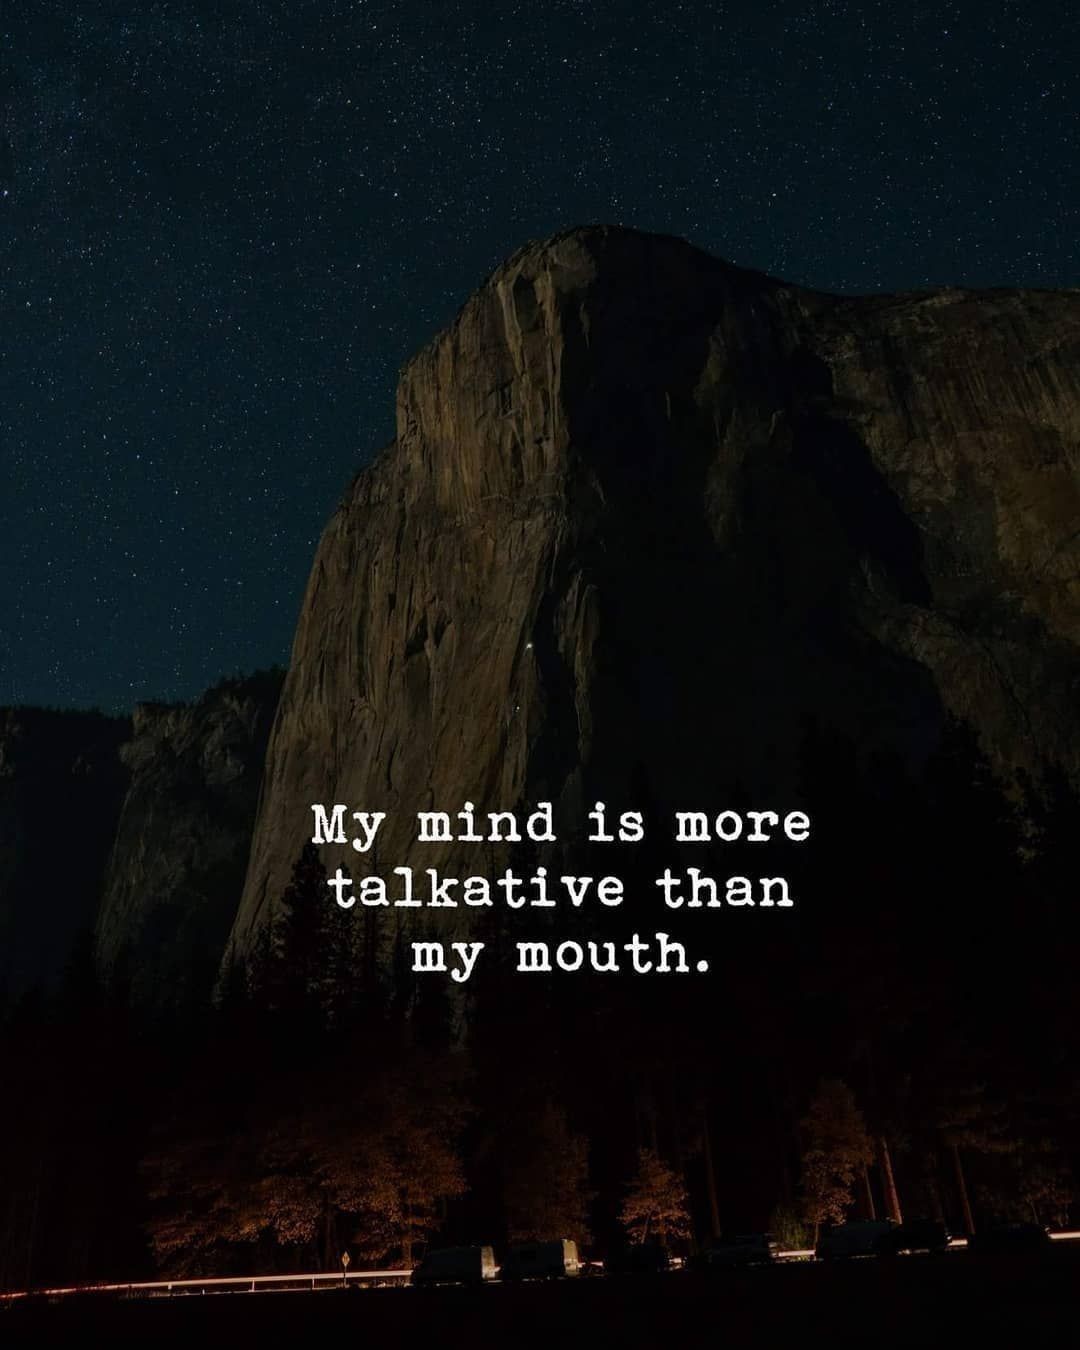 My mind is more talkative than my mouth.